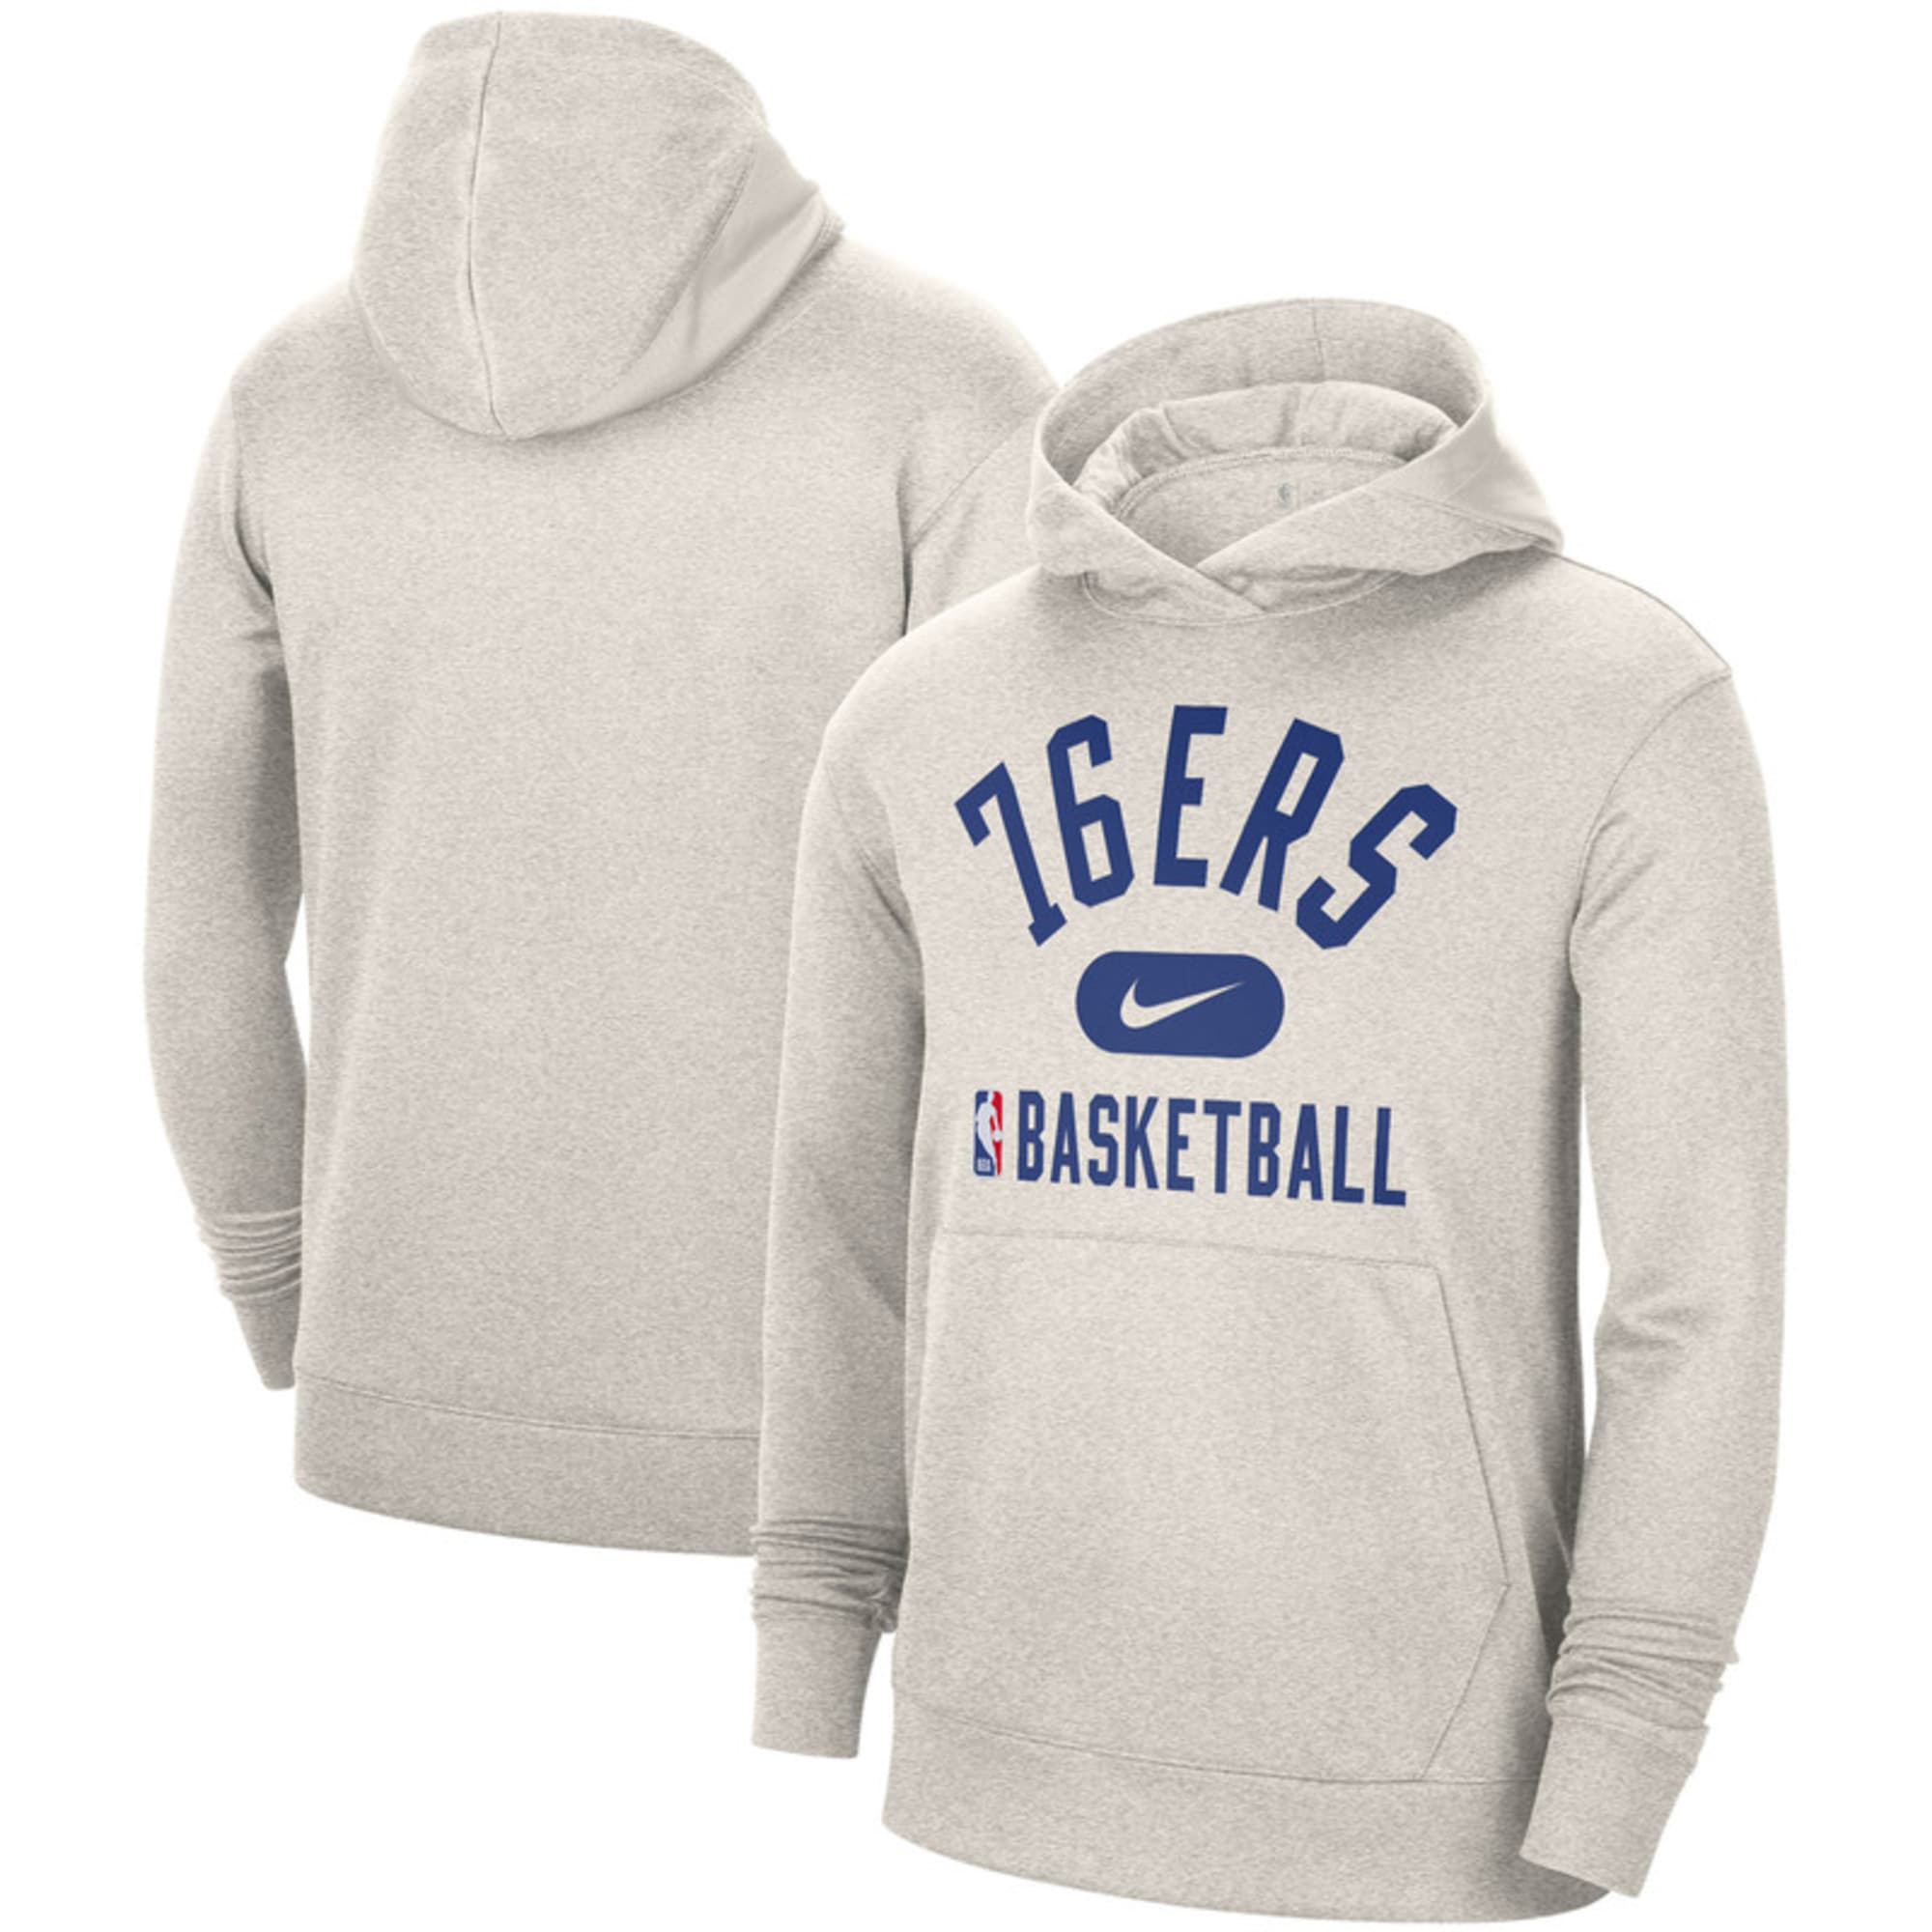 The perfect holiday gifts for the Philadelphia 76ers fan